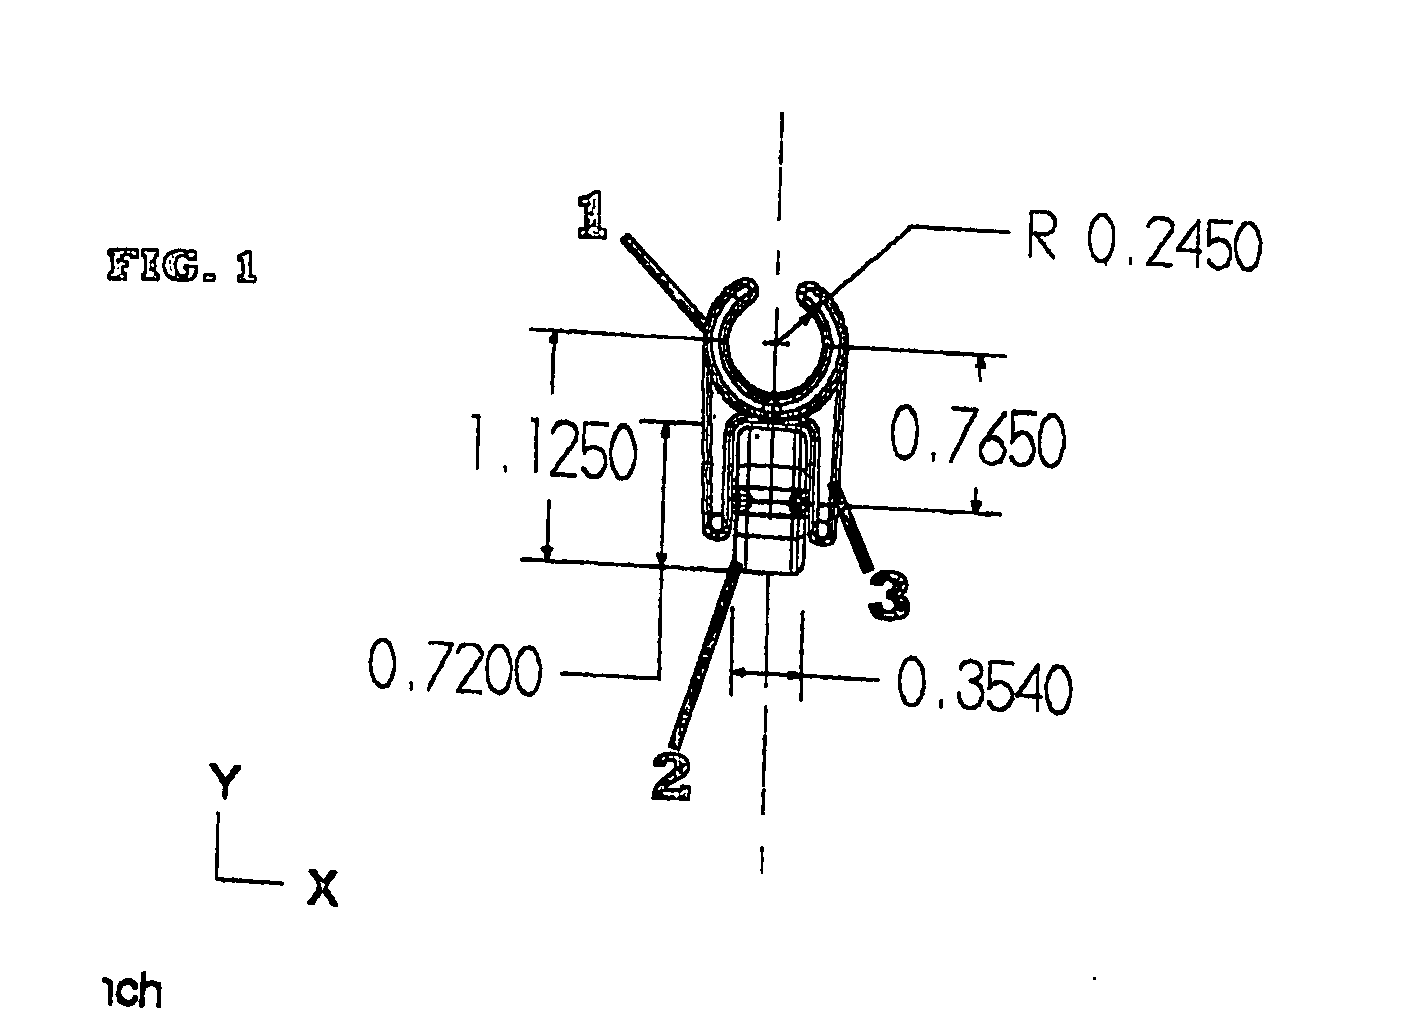 Clip/fastener with wheel, ball bearing, or roller device or apparatus: Junior shark guiding wheel